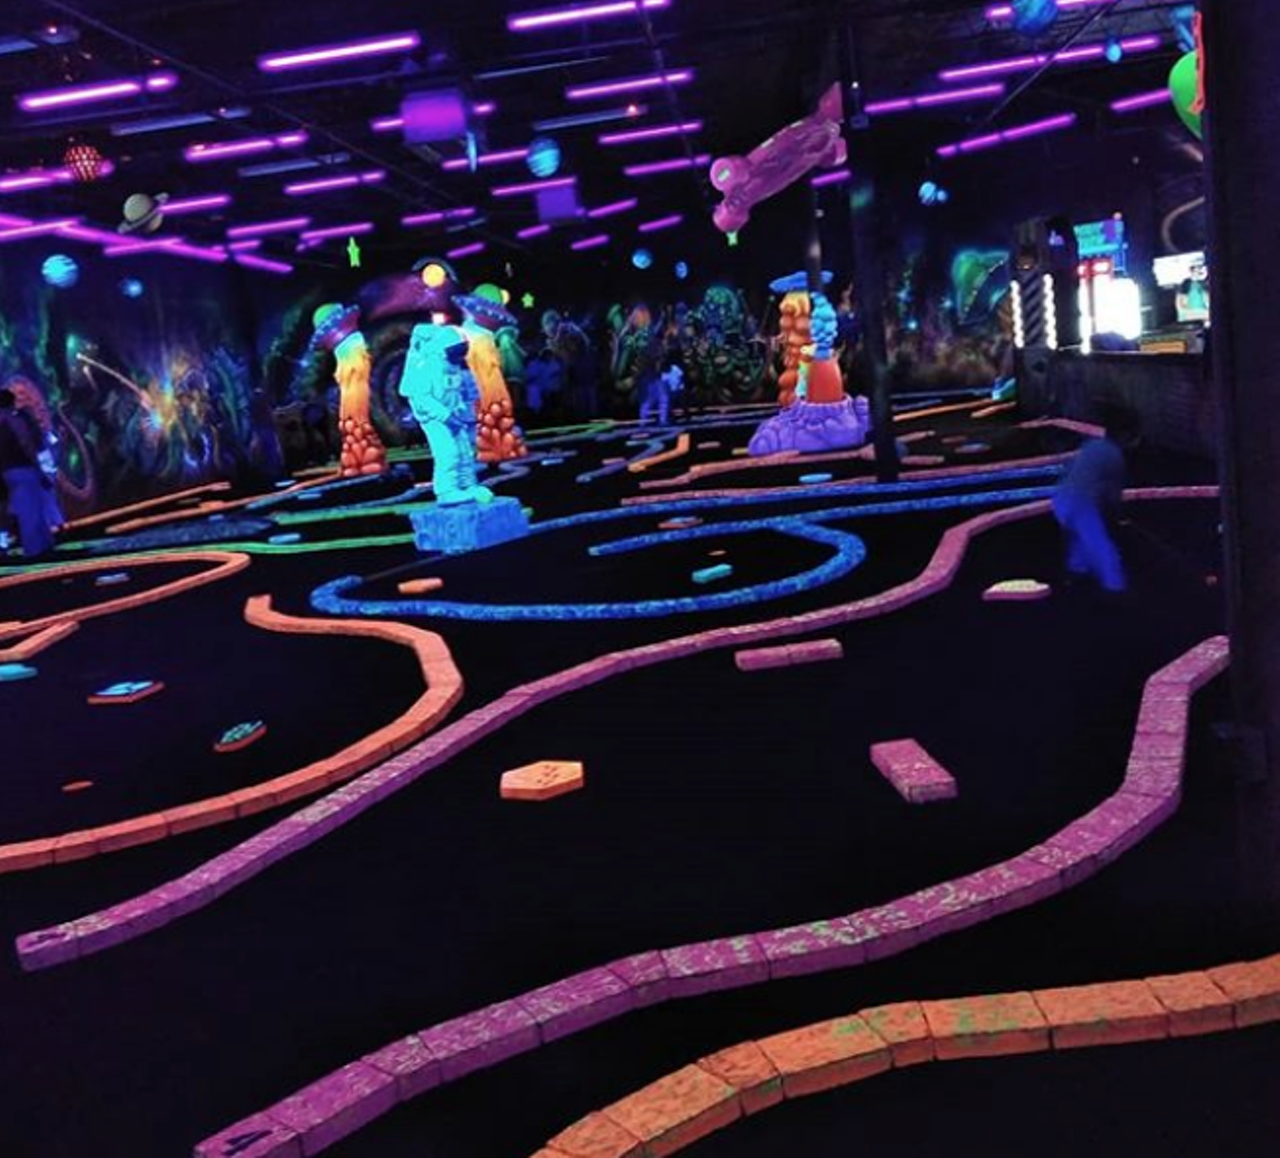 Practice your aim at Cosmic Mayhem Black Light Mini Golf
903 E Bitters Road, Suite 310, (210) 437-1072, cosmicmayhem.com
Head to Cosmic Mayhem to cause some mayhem while you wait out the rain. No, not really, but you can get in a few rounds of mini golf in this blacklight course. You can also enjoy drinks at the space-themed beer and wine bar between rounds.
Photo via Instagram / amberrosehernandez